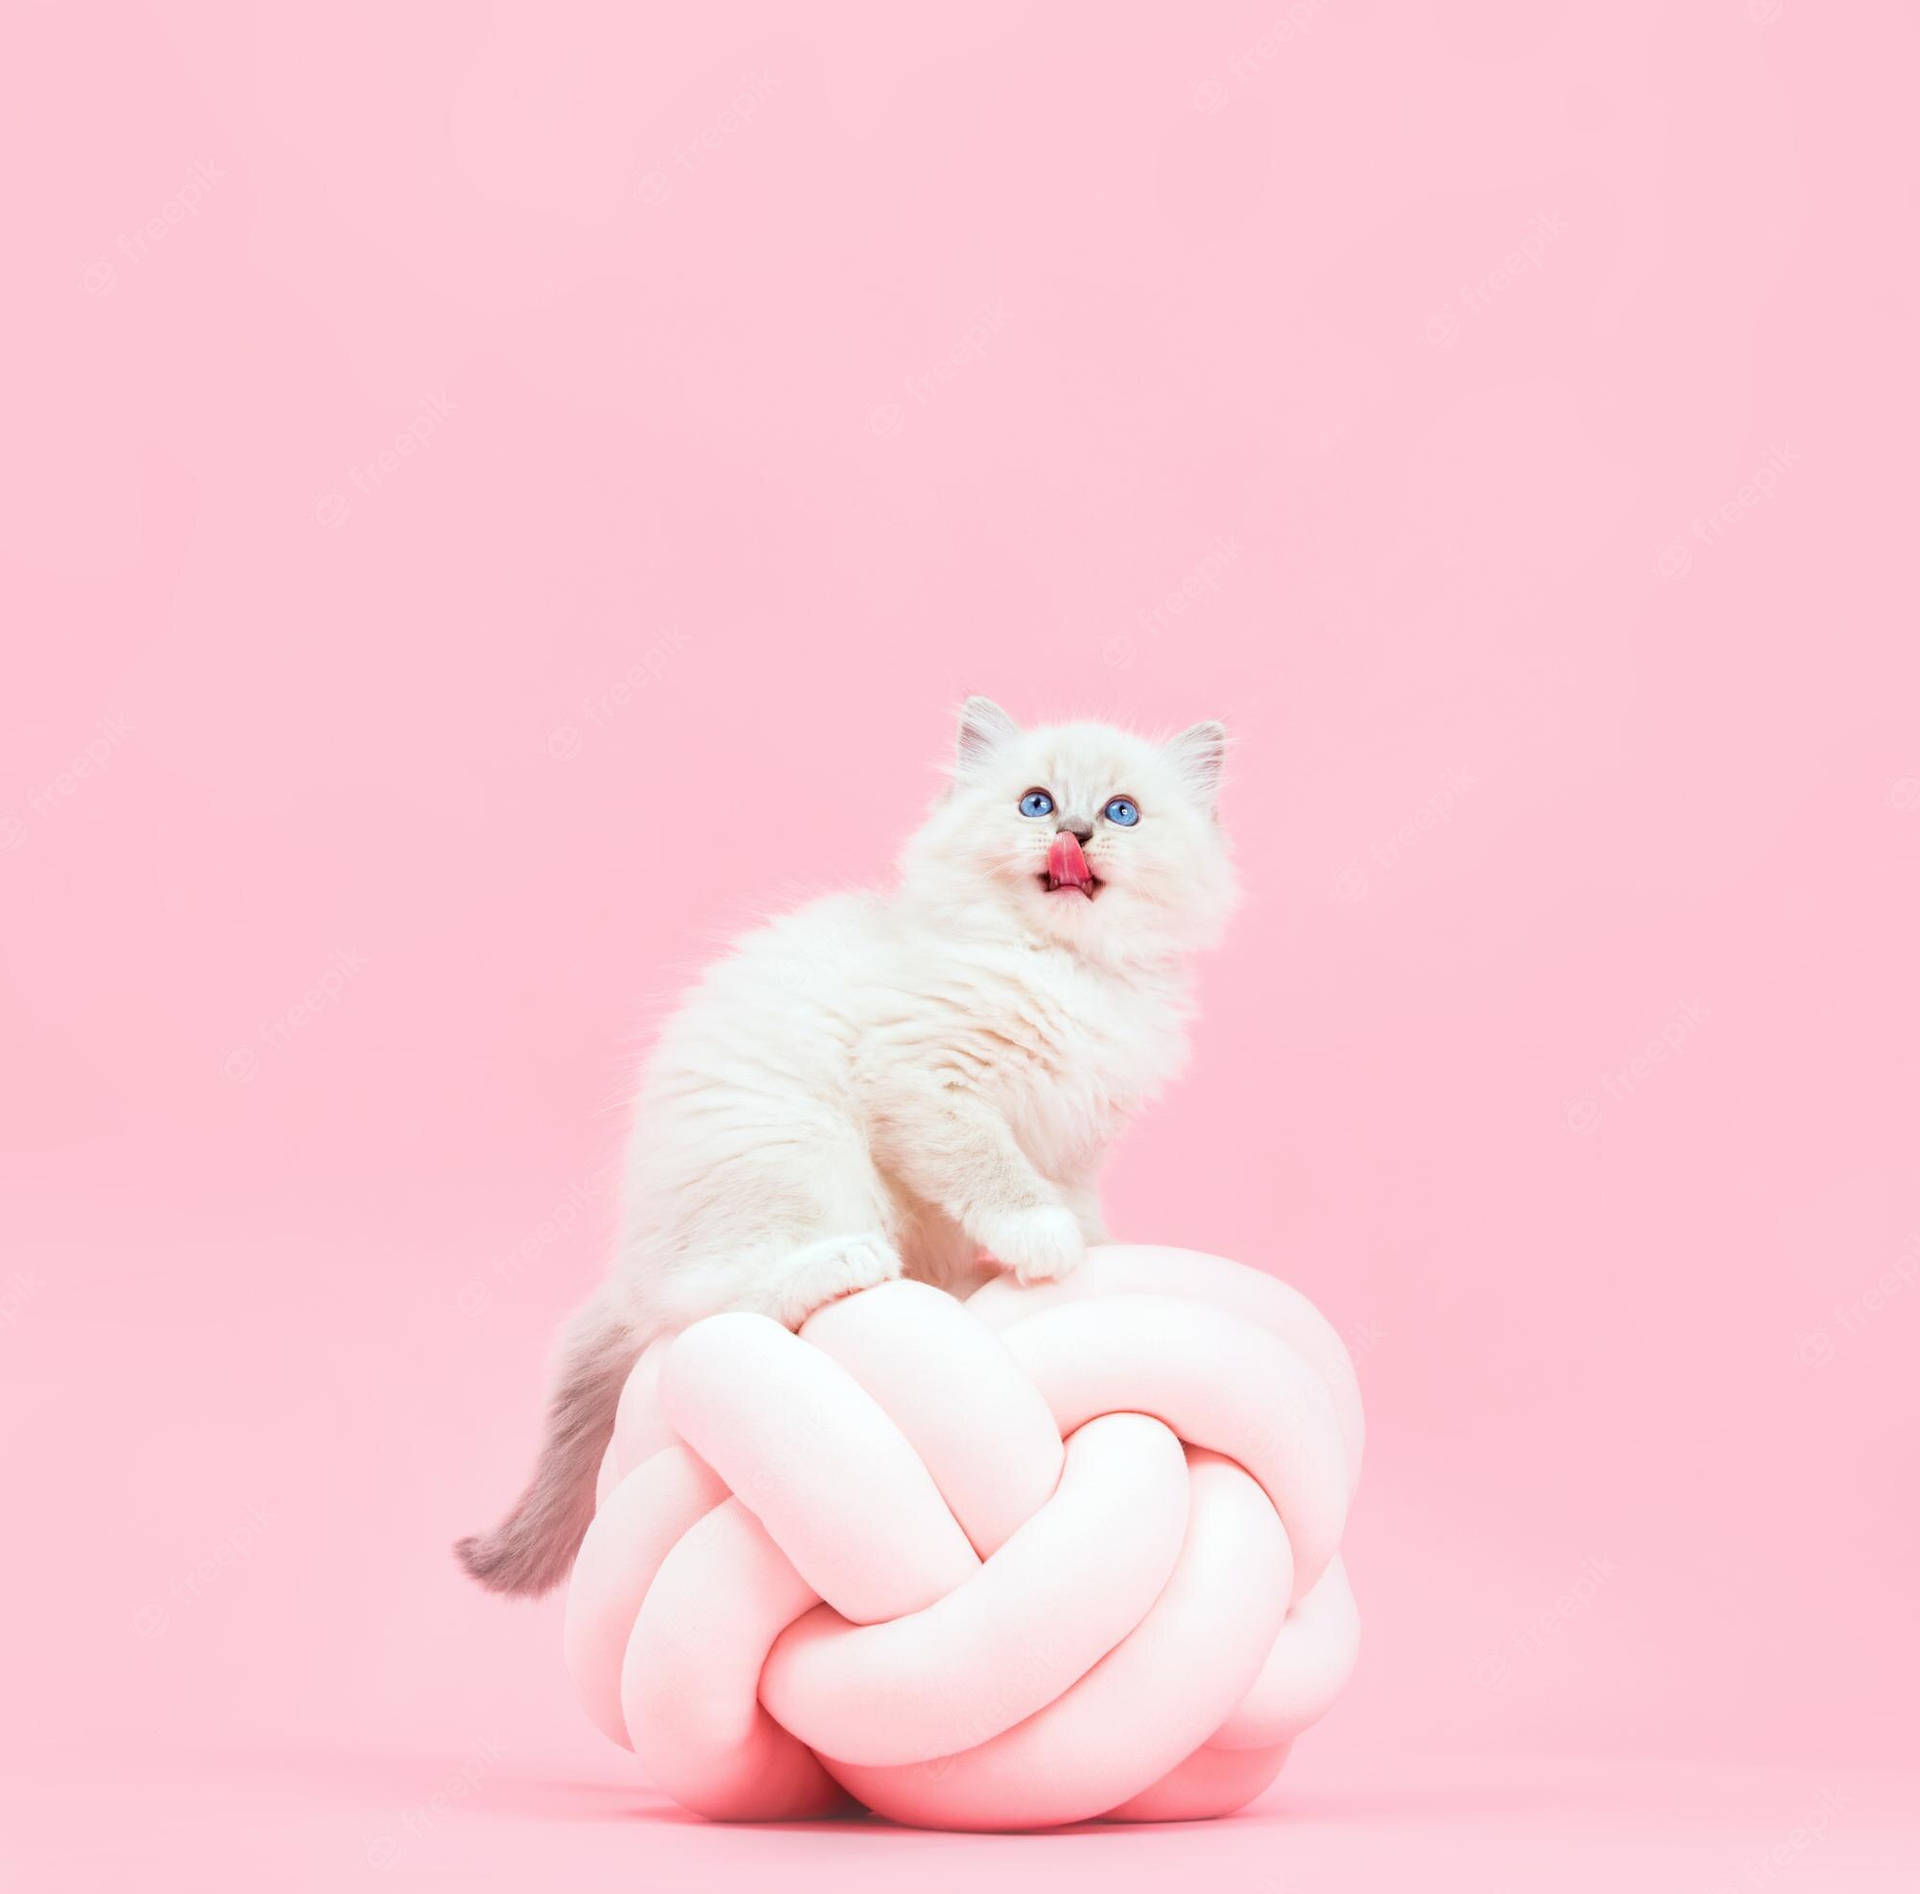 A White Kitten Sitting On Top Of A Pink Ball Wallpaper